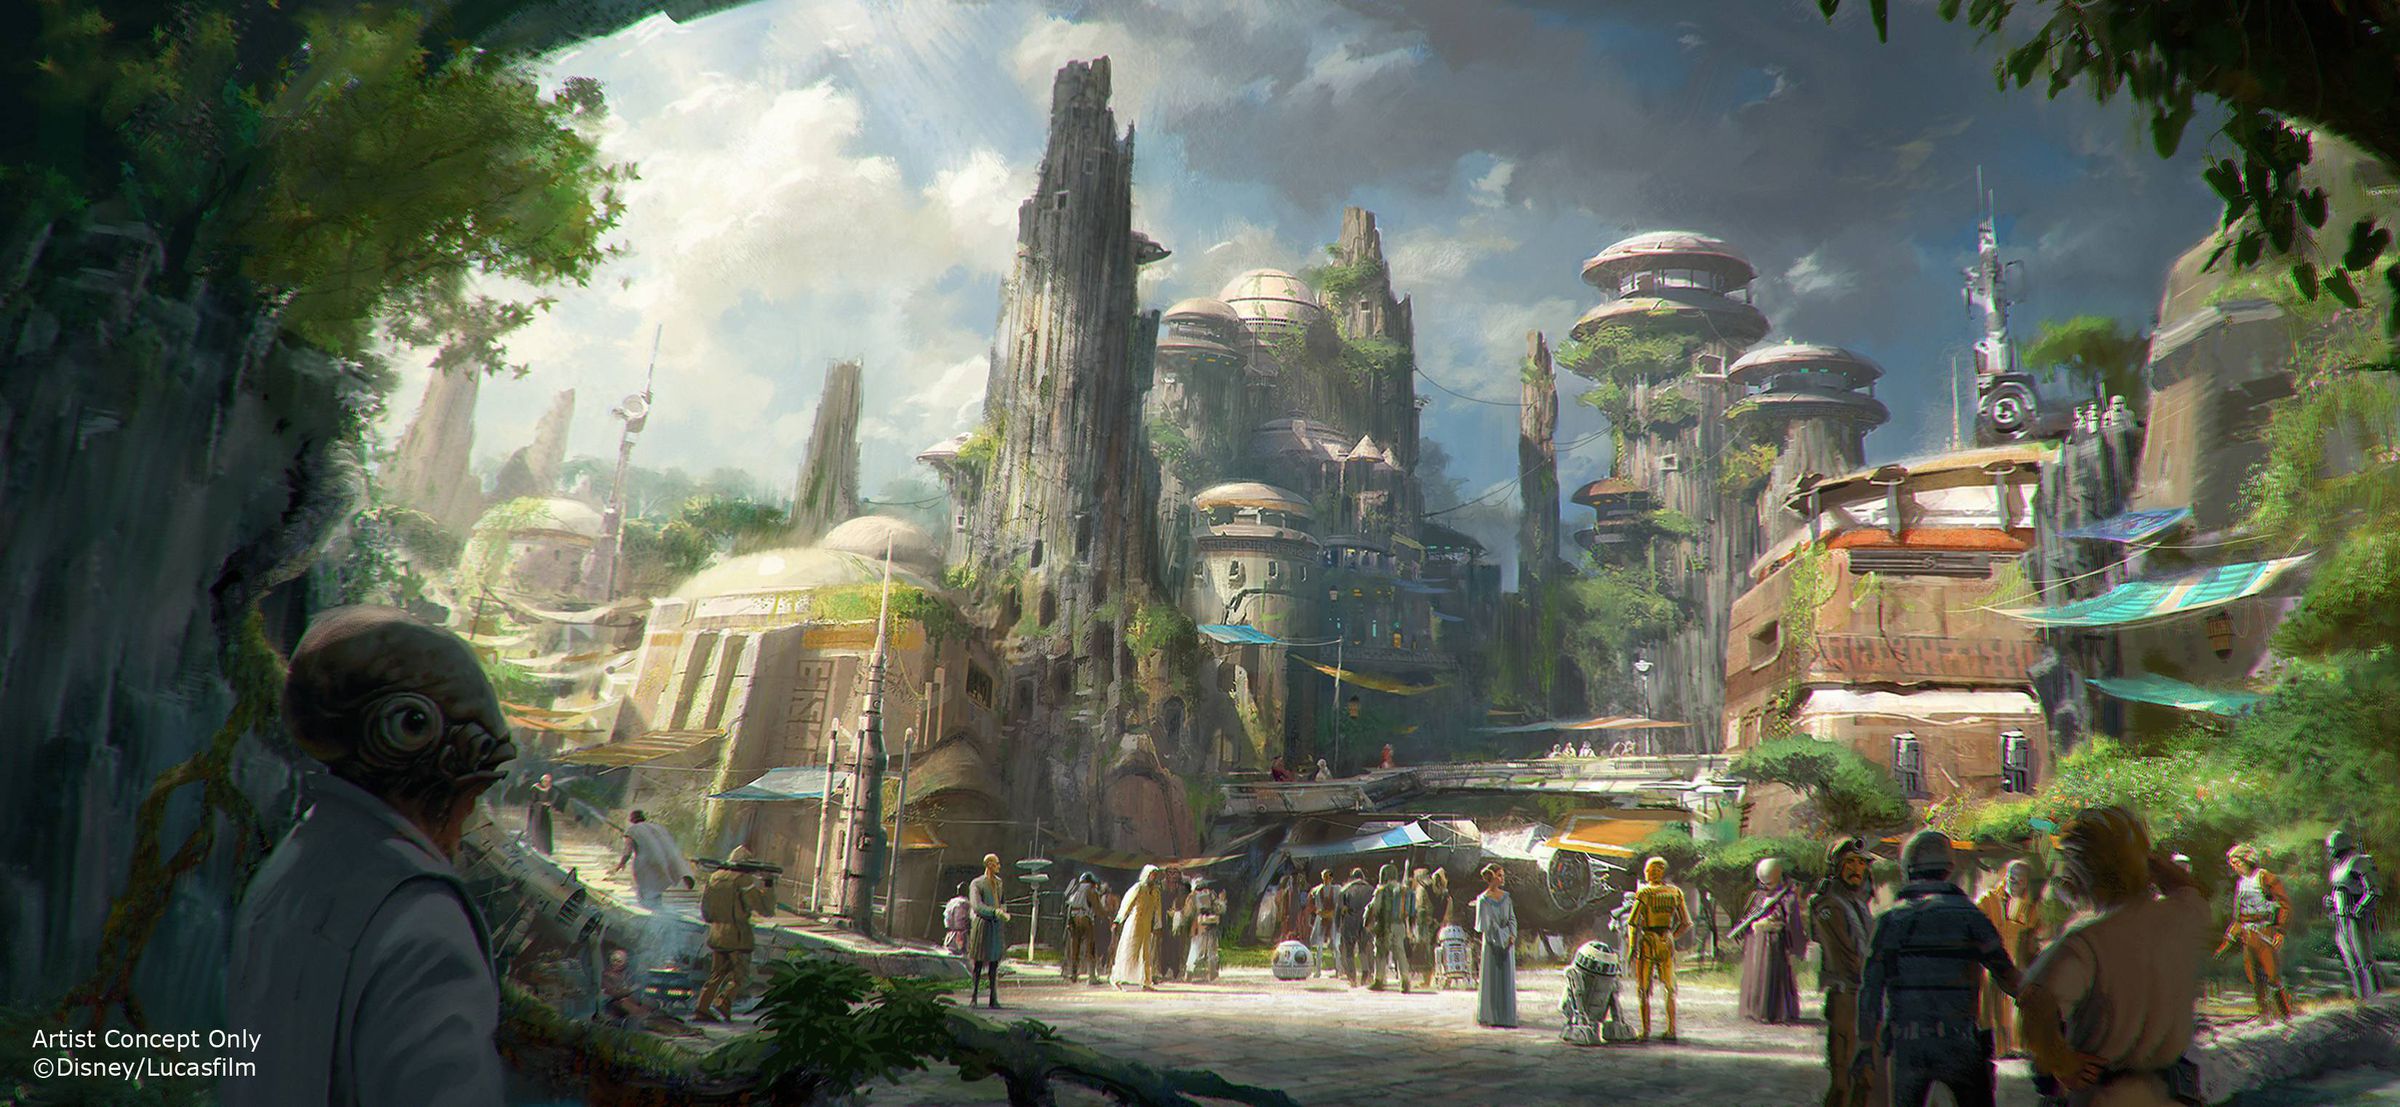 Star Wars Land concept drawing.